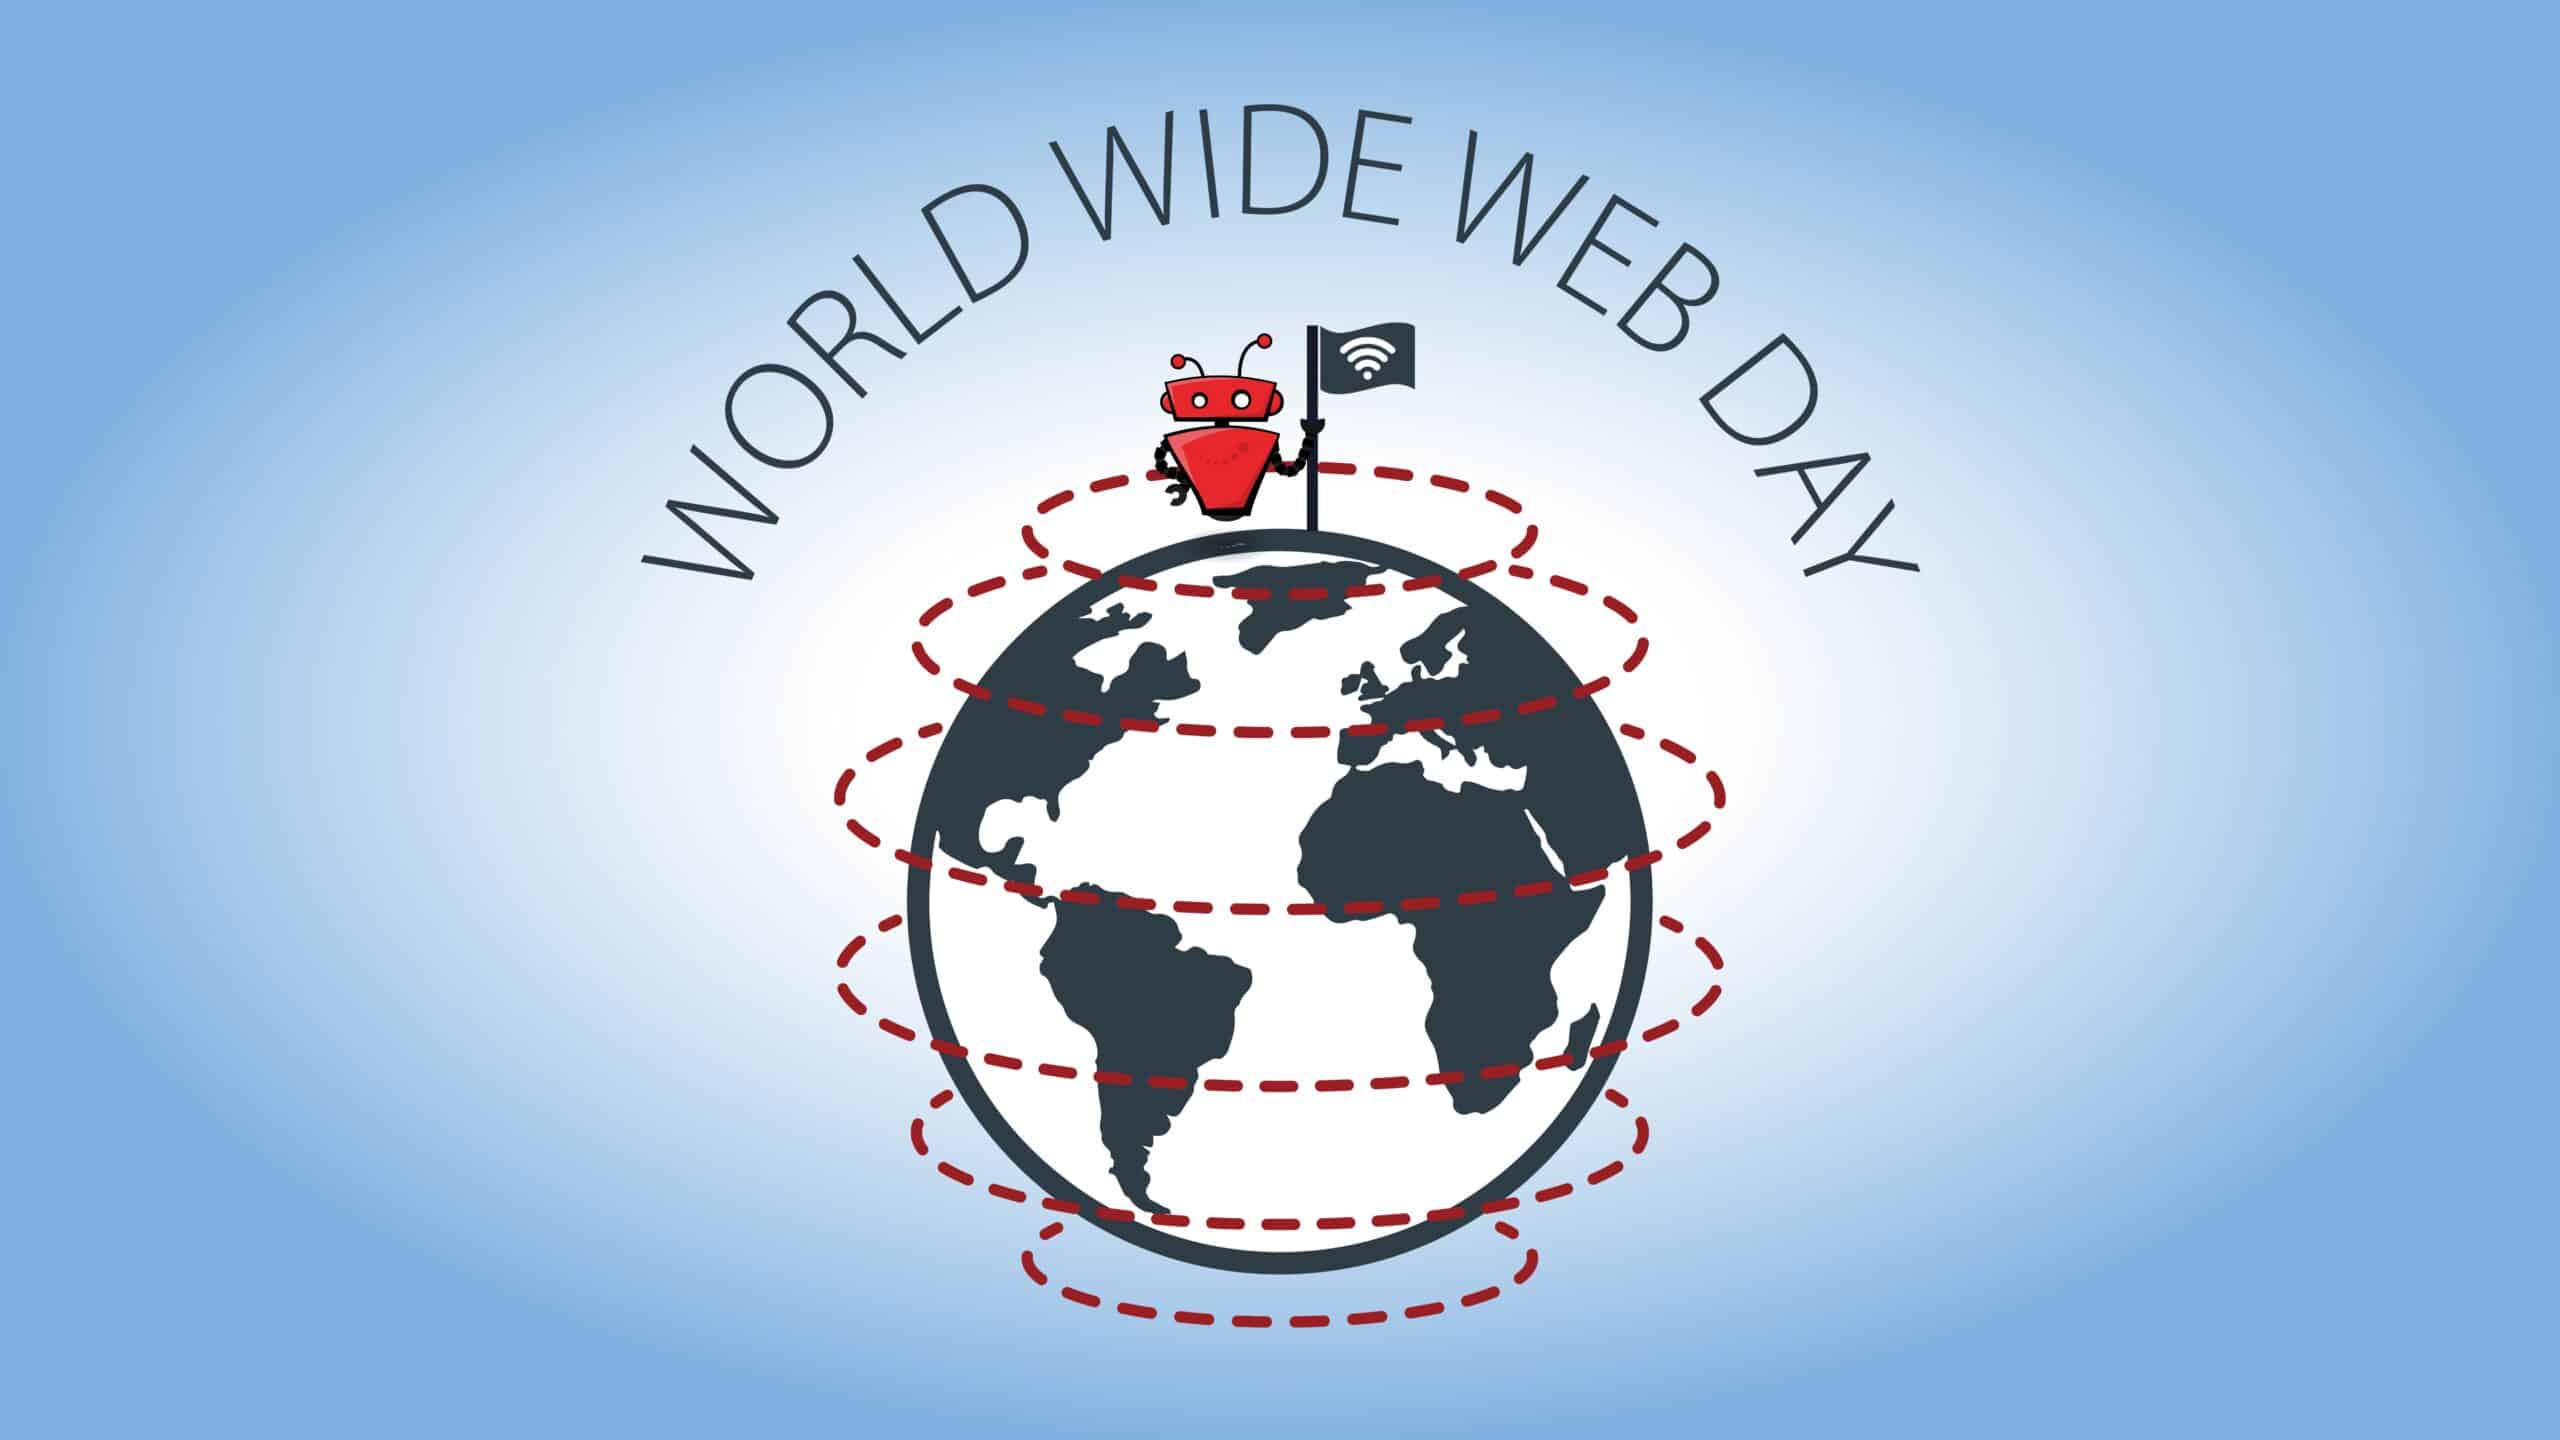 xbert on top of a globe, holding a flag for world wide web day